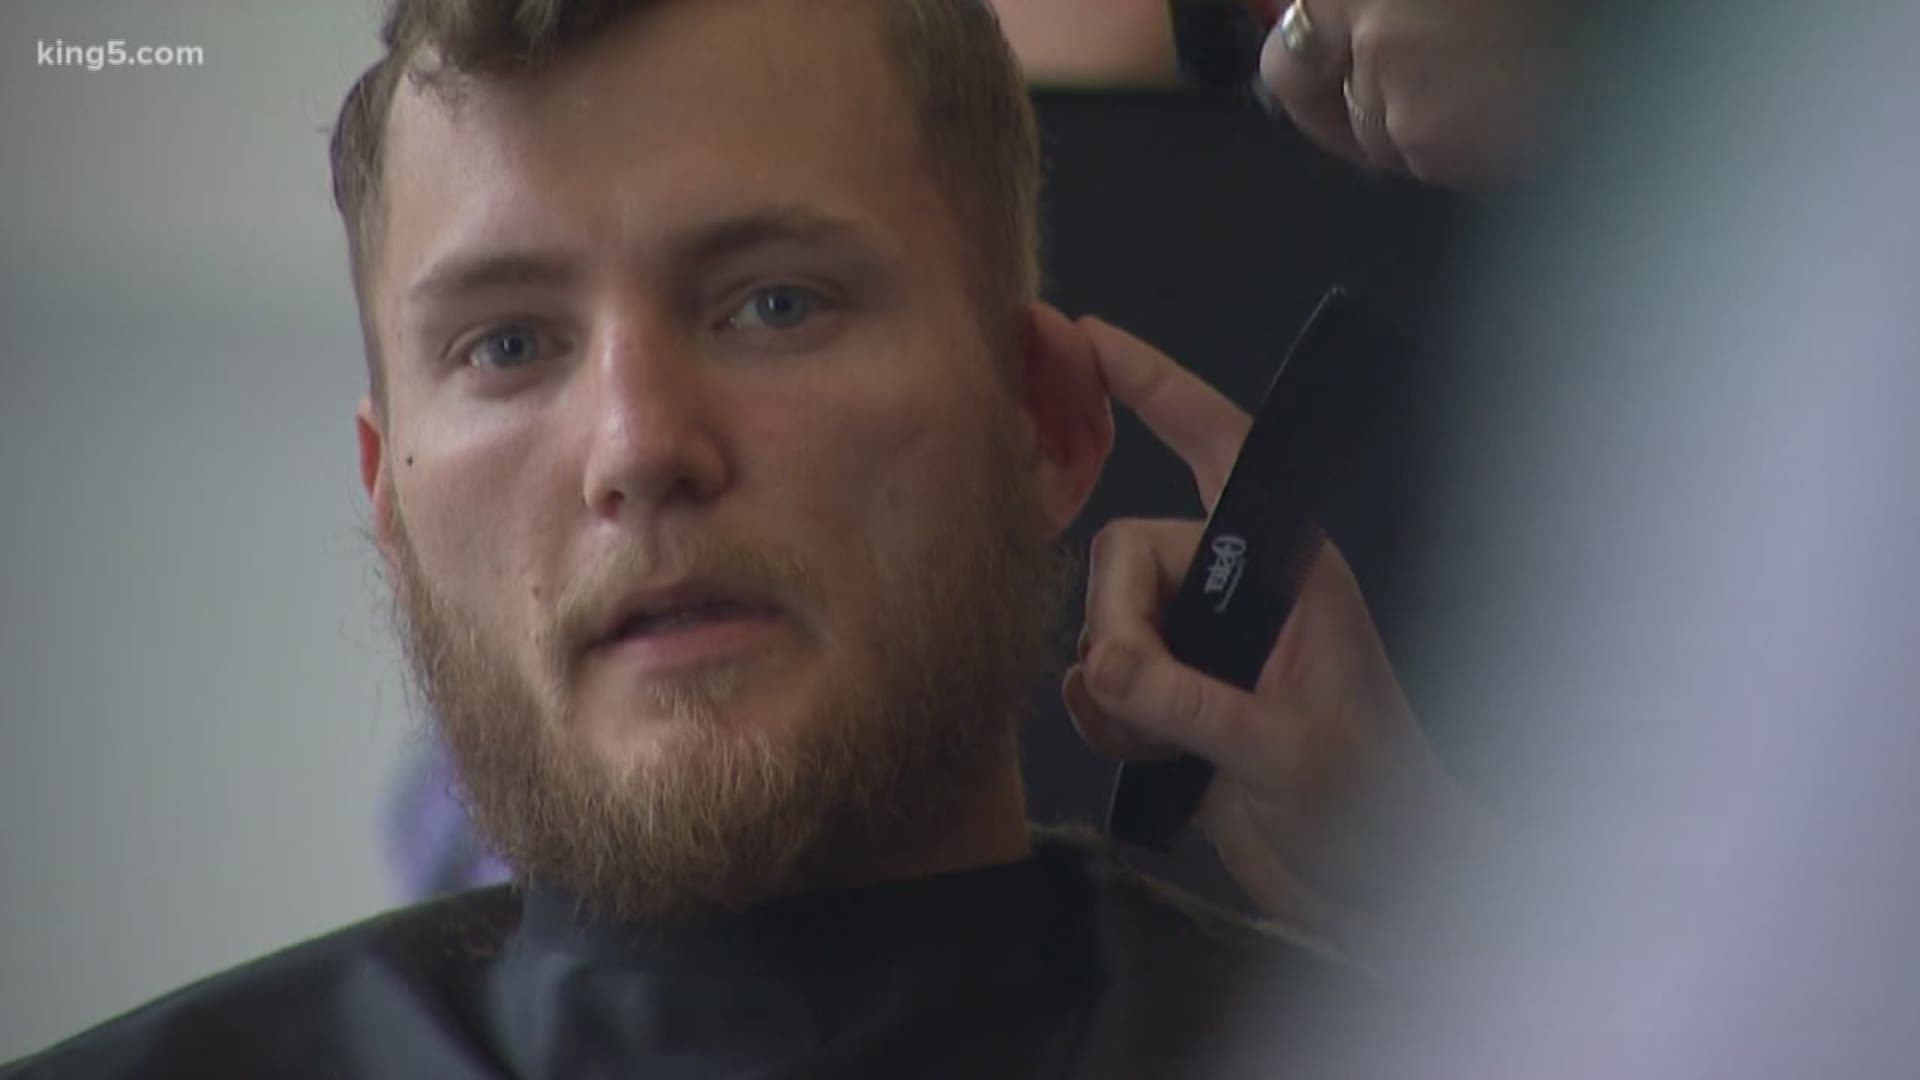 Helping the outside reflect the inside. That's the goal of an event this week for men coming out of homelessness. The Union Gospel Mission gave makeovers to 50 men. The before and after from KING 5's Michael Crowe.